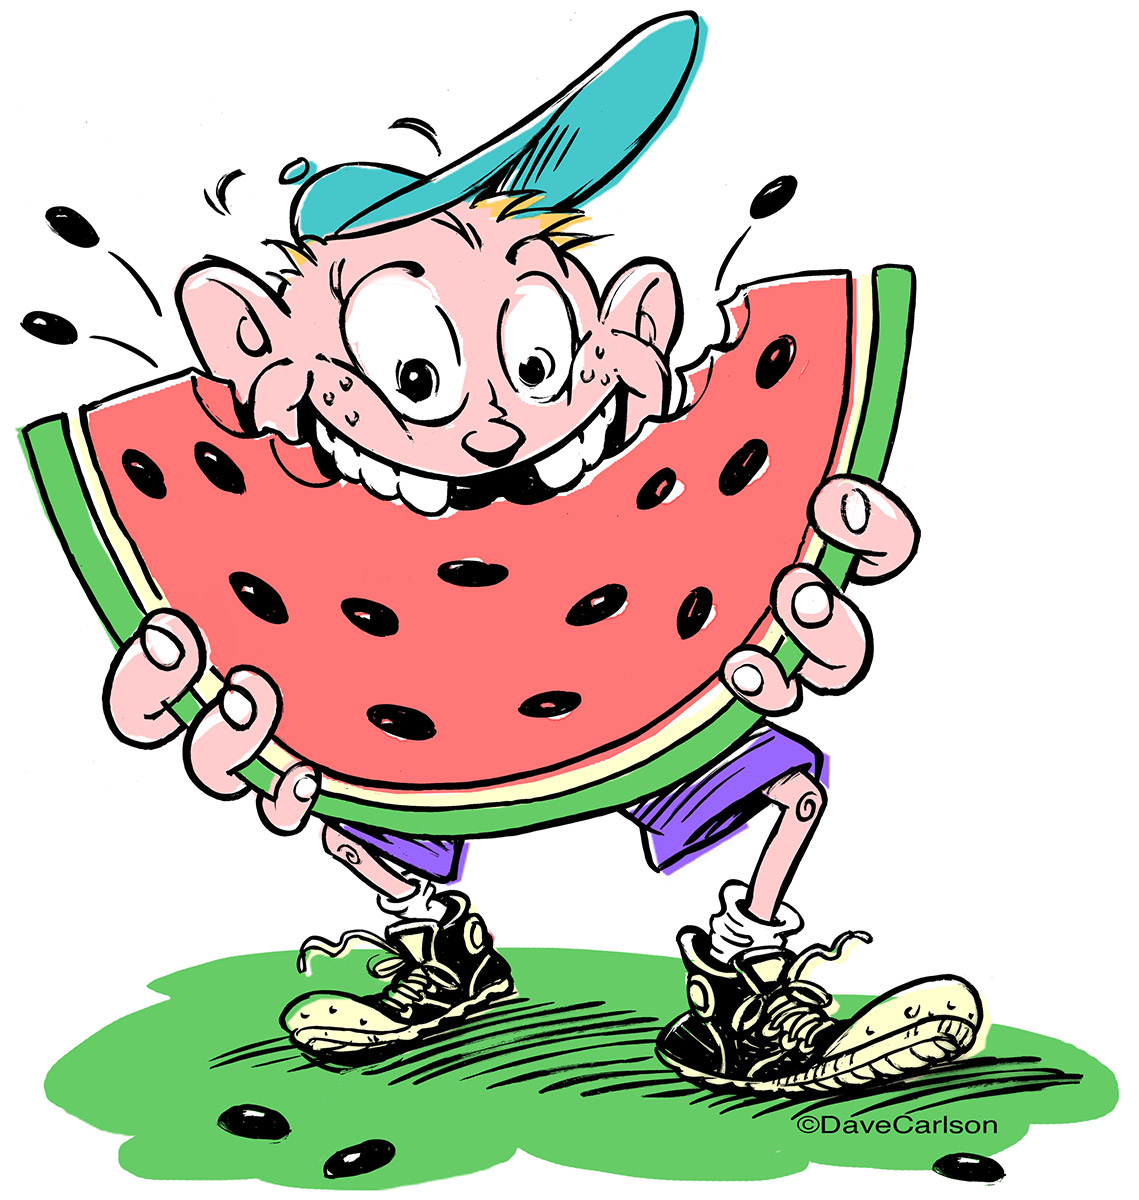 Cartoon of young kid eating watermelon